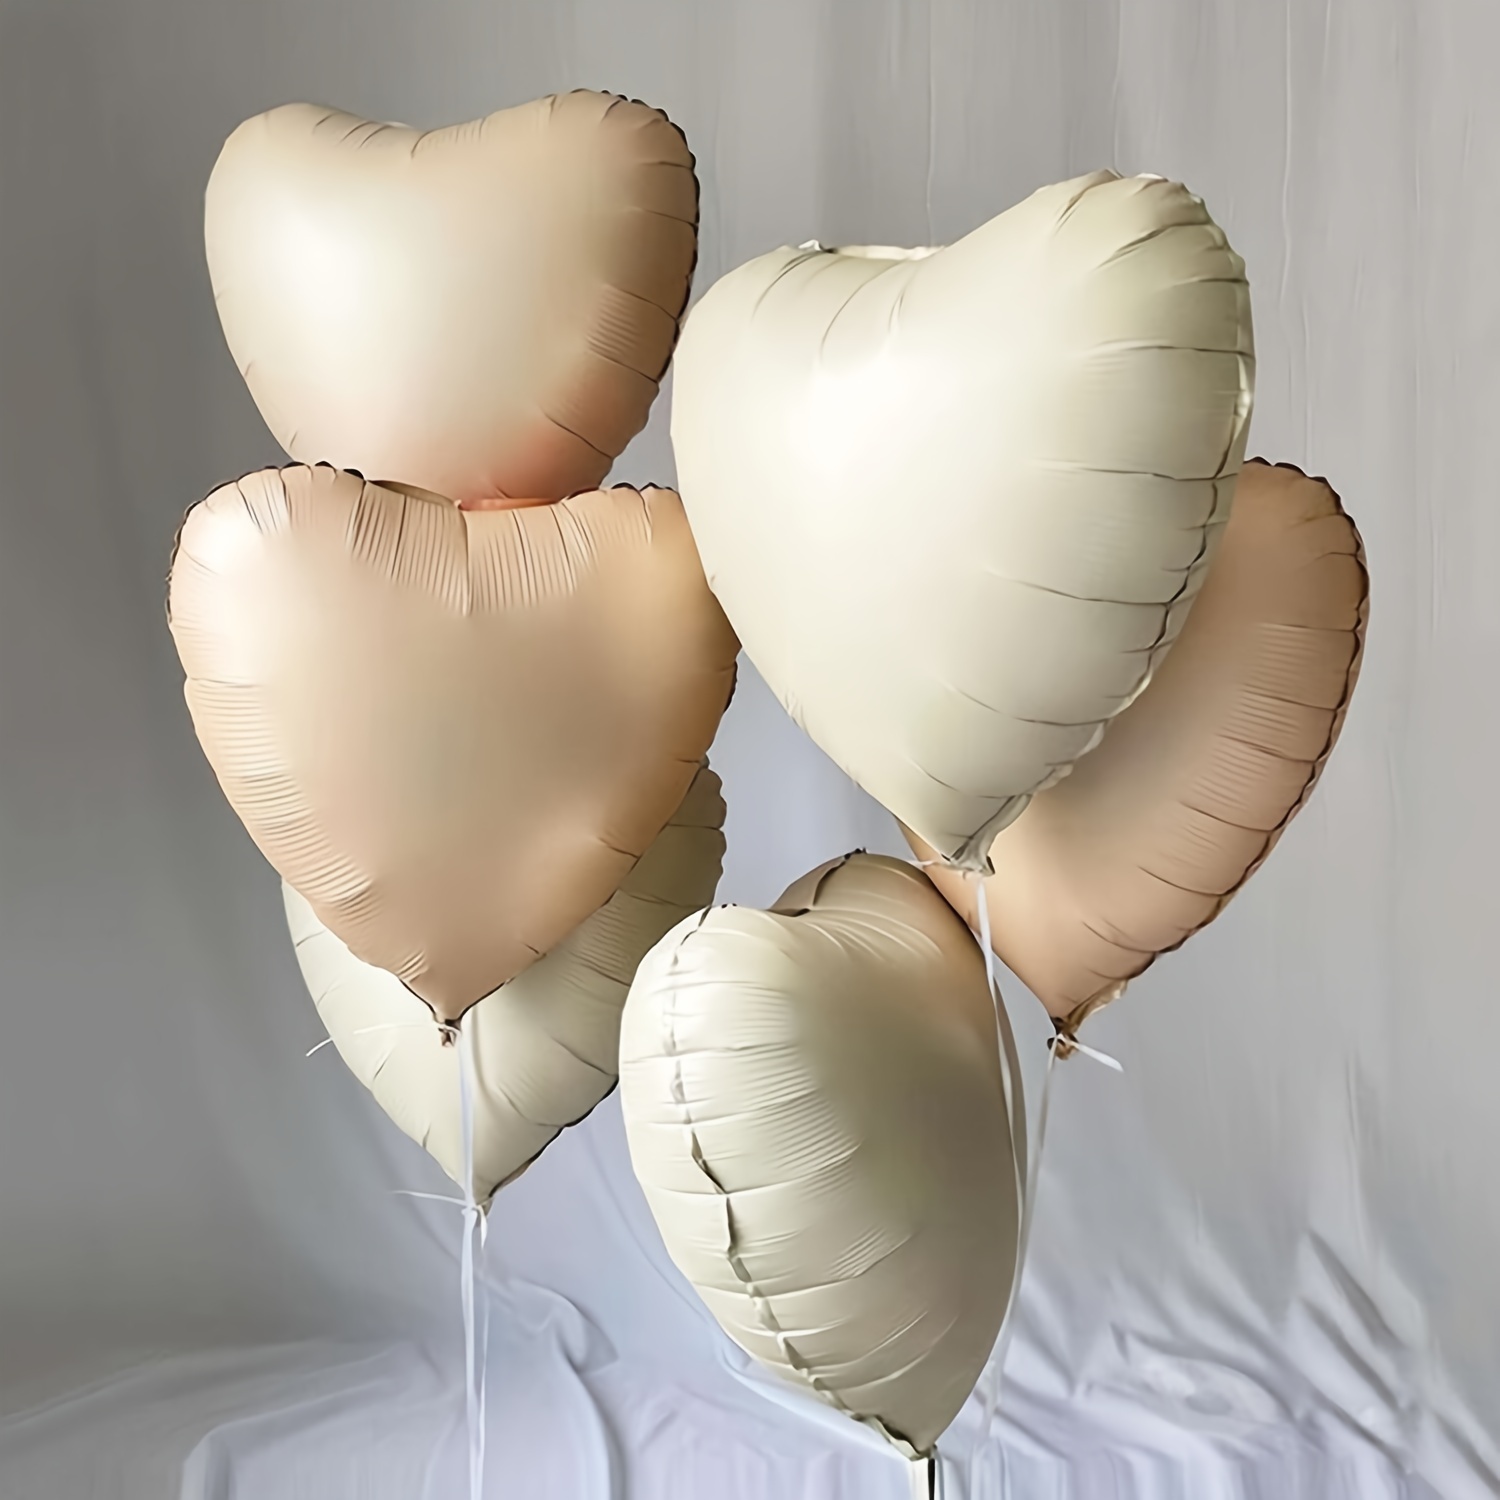 

Elegant Heart-shaped Foil Balloons Set, Cream-white, 6-pack - 18" Mylar Helium Balloons For Weddings, Anniversaries, Valentine's Day & All-season Party Decorations, Suitable For Ages 14+